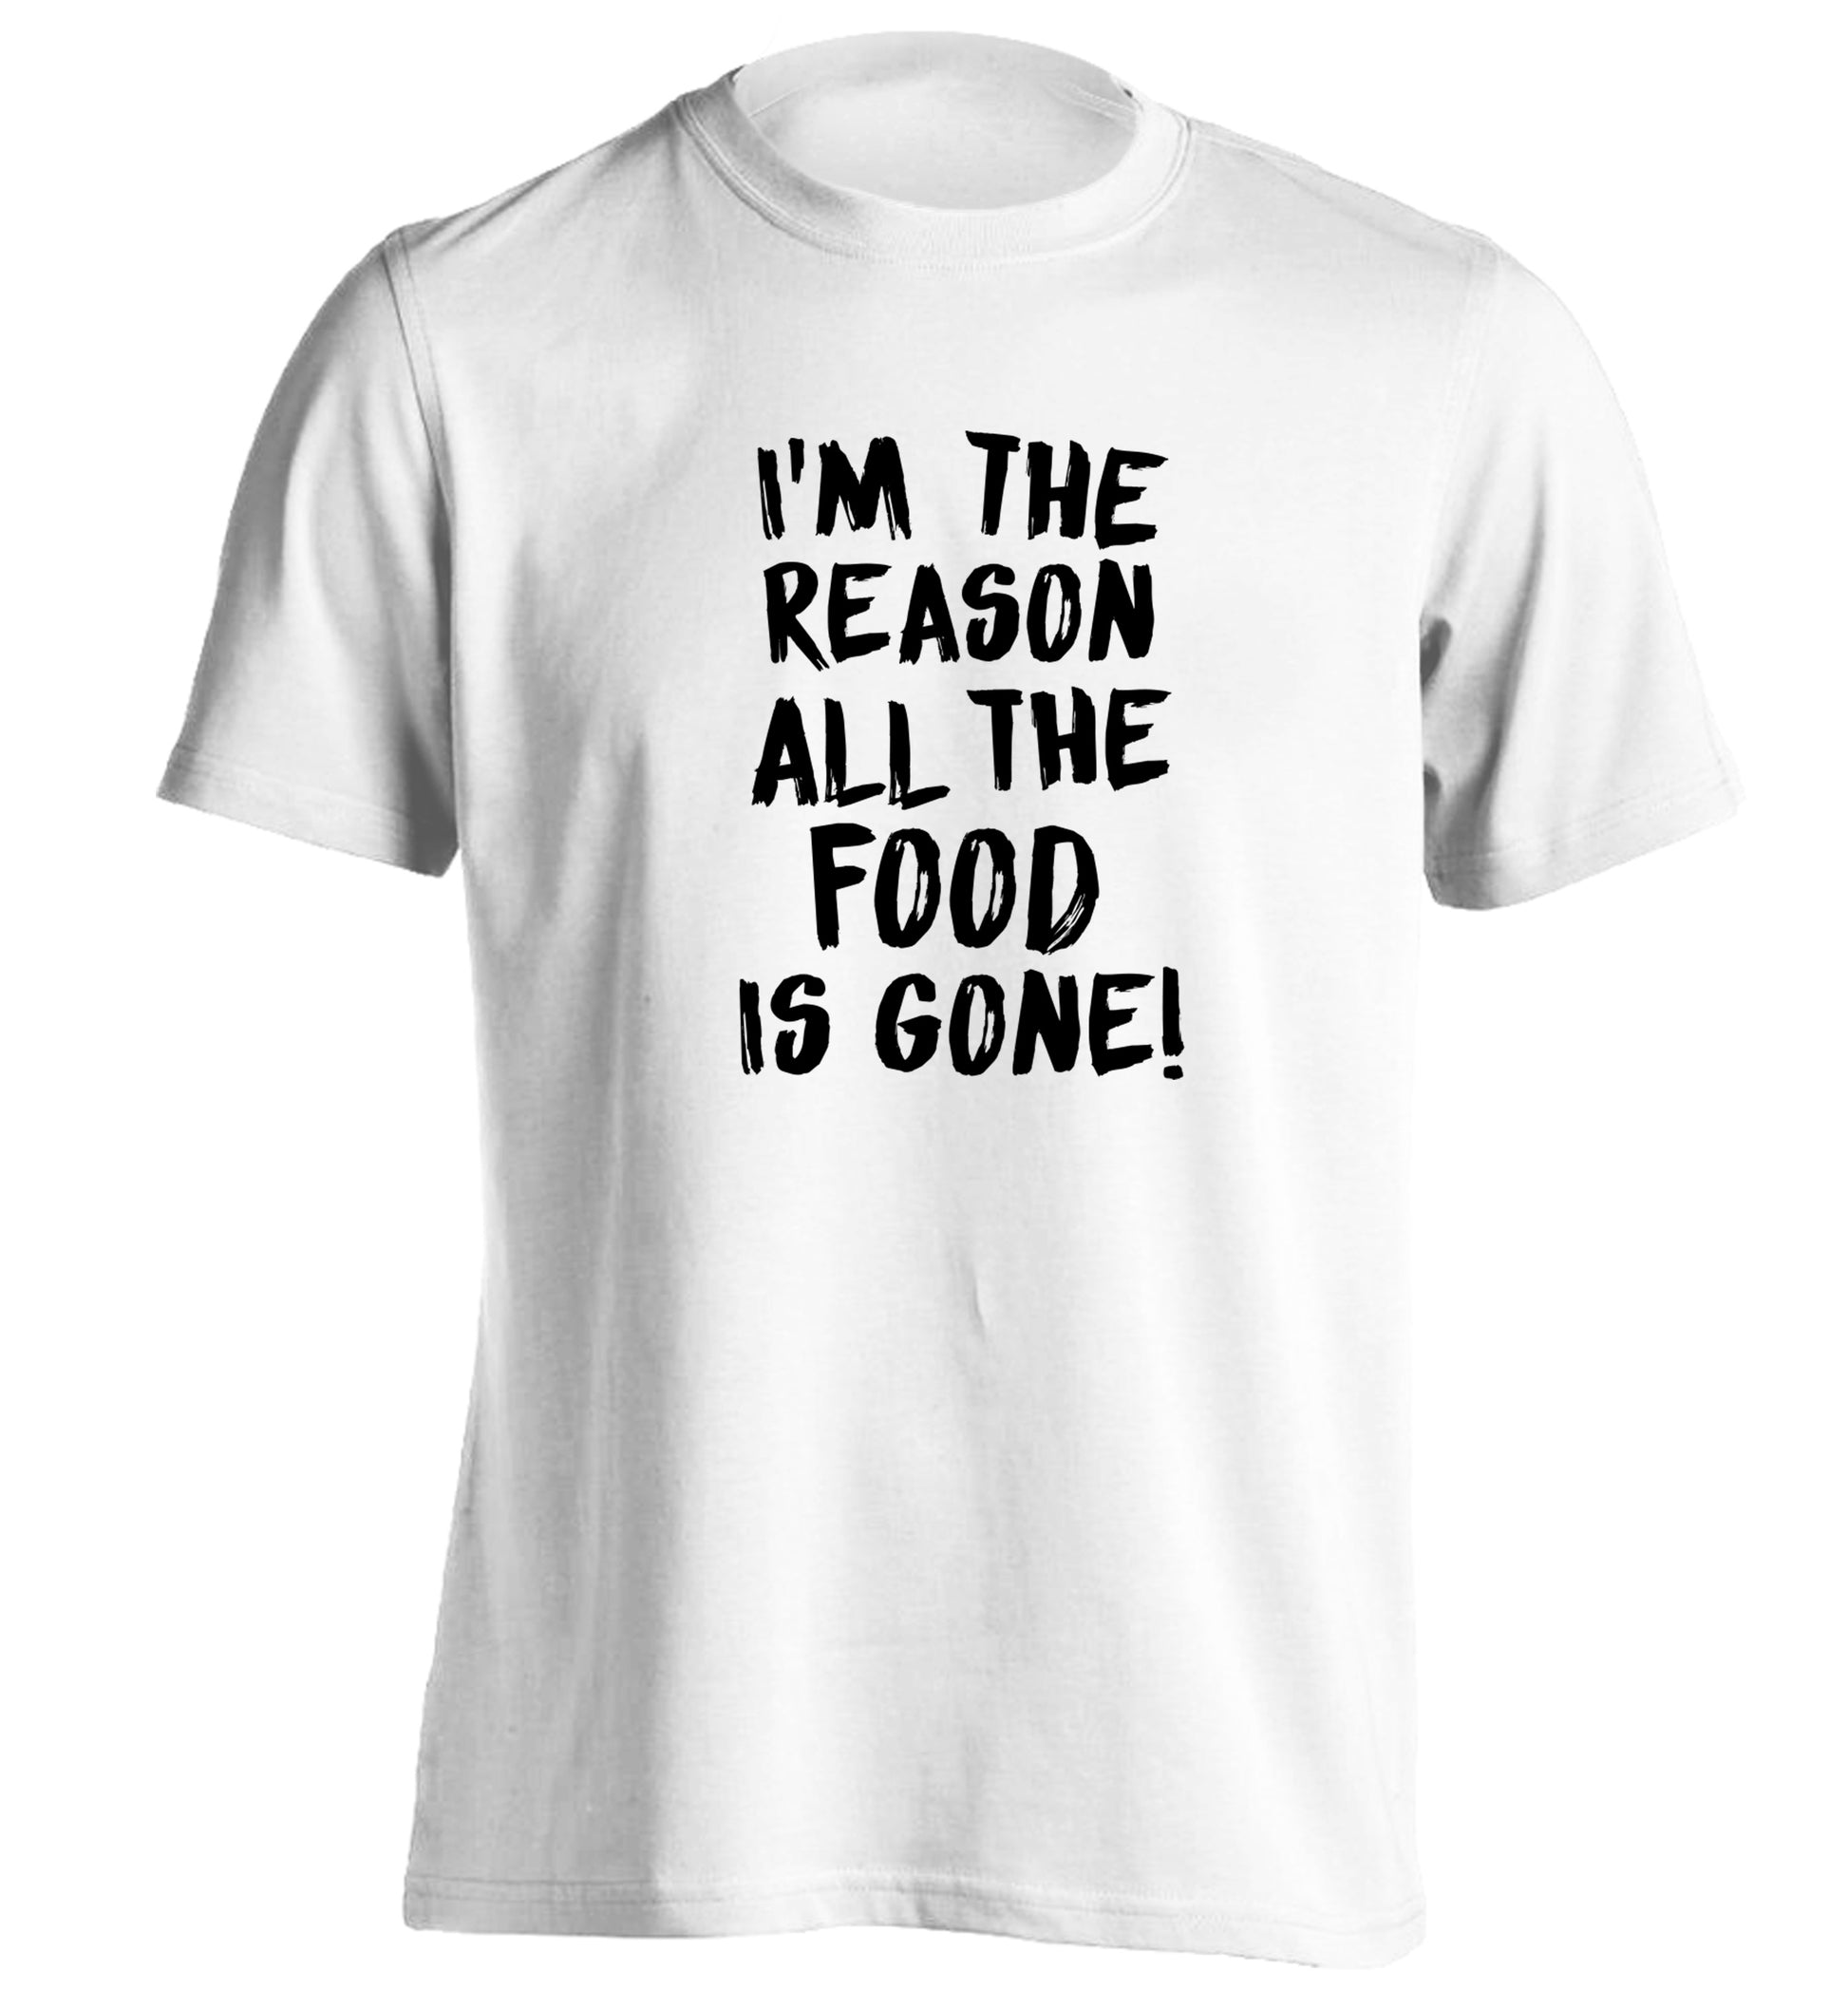 I'm the reason why all the food is gone adults unisex white Tshirt 2XL